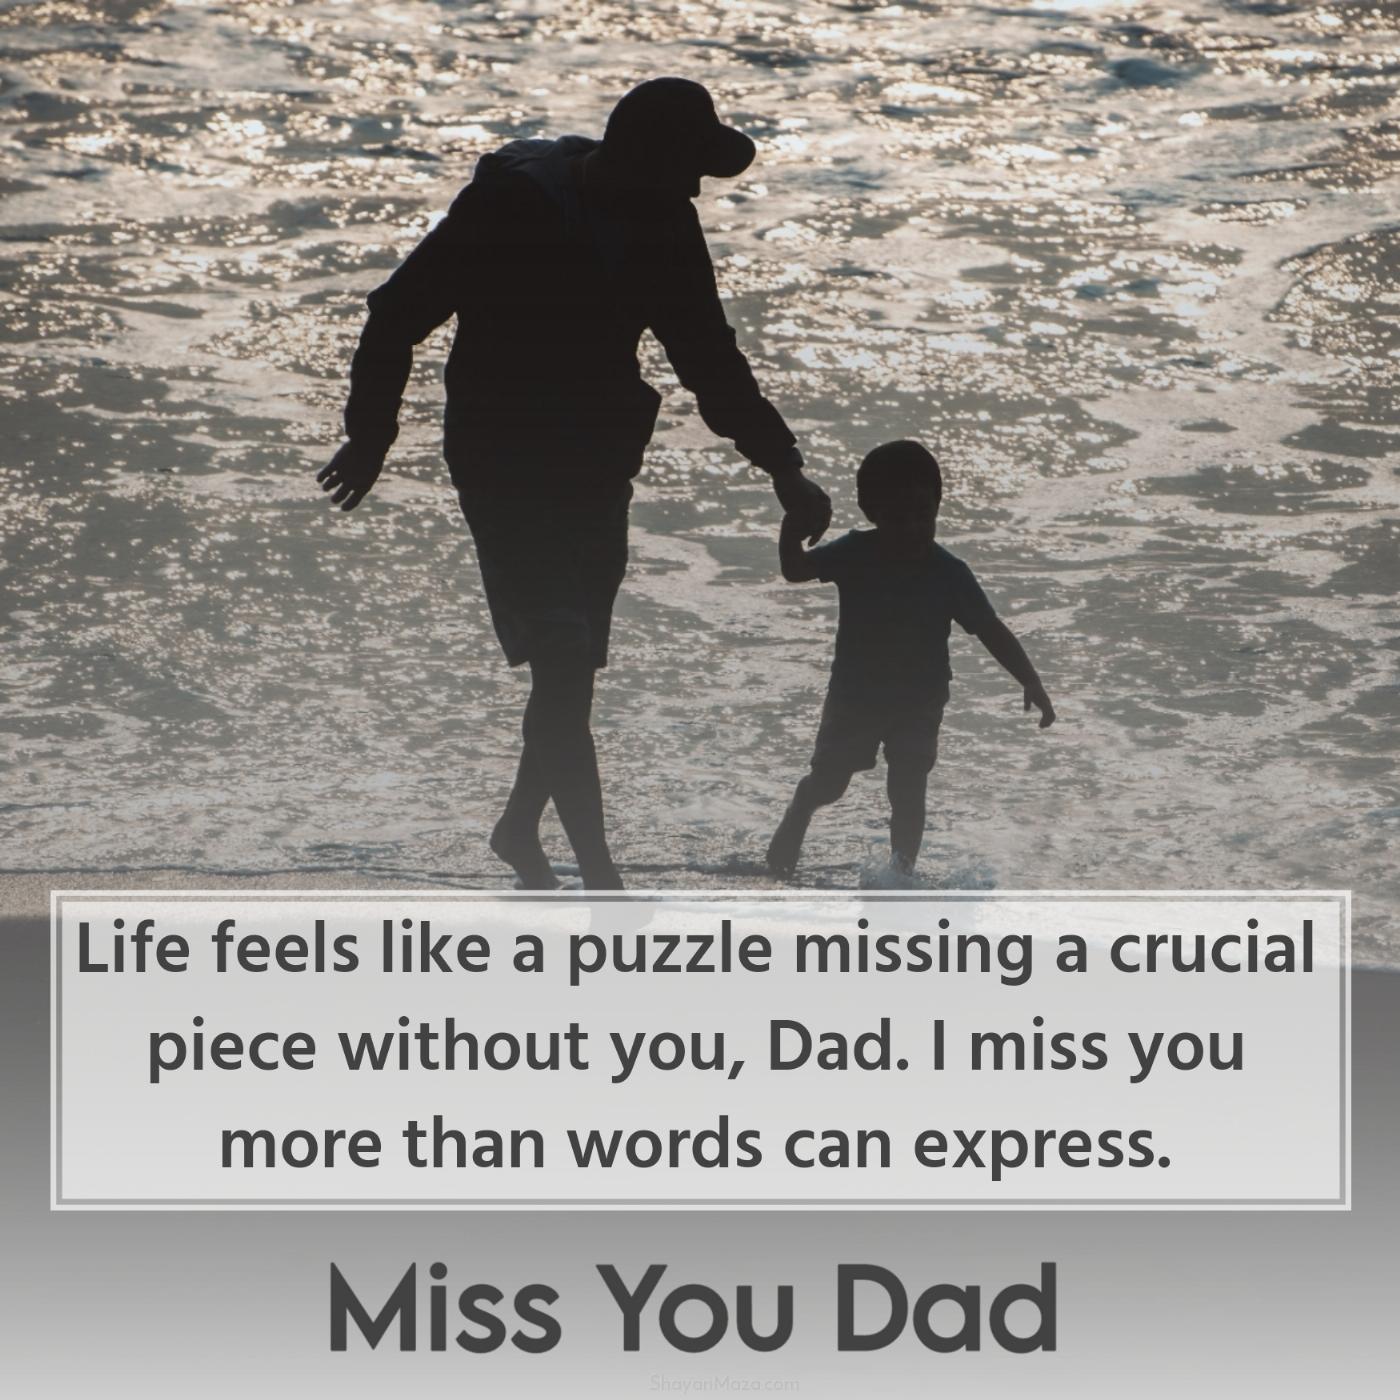 Life feels like a puzzle missing a crucial piece without you Dad